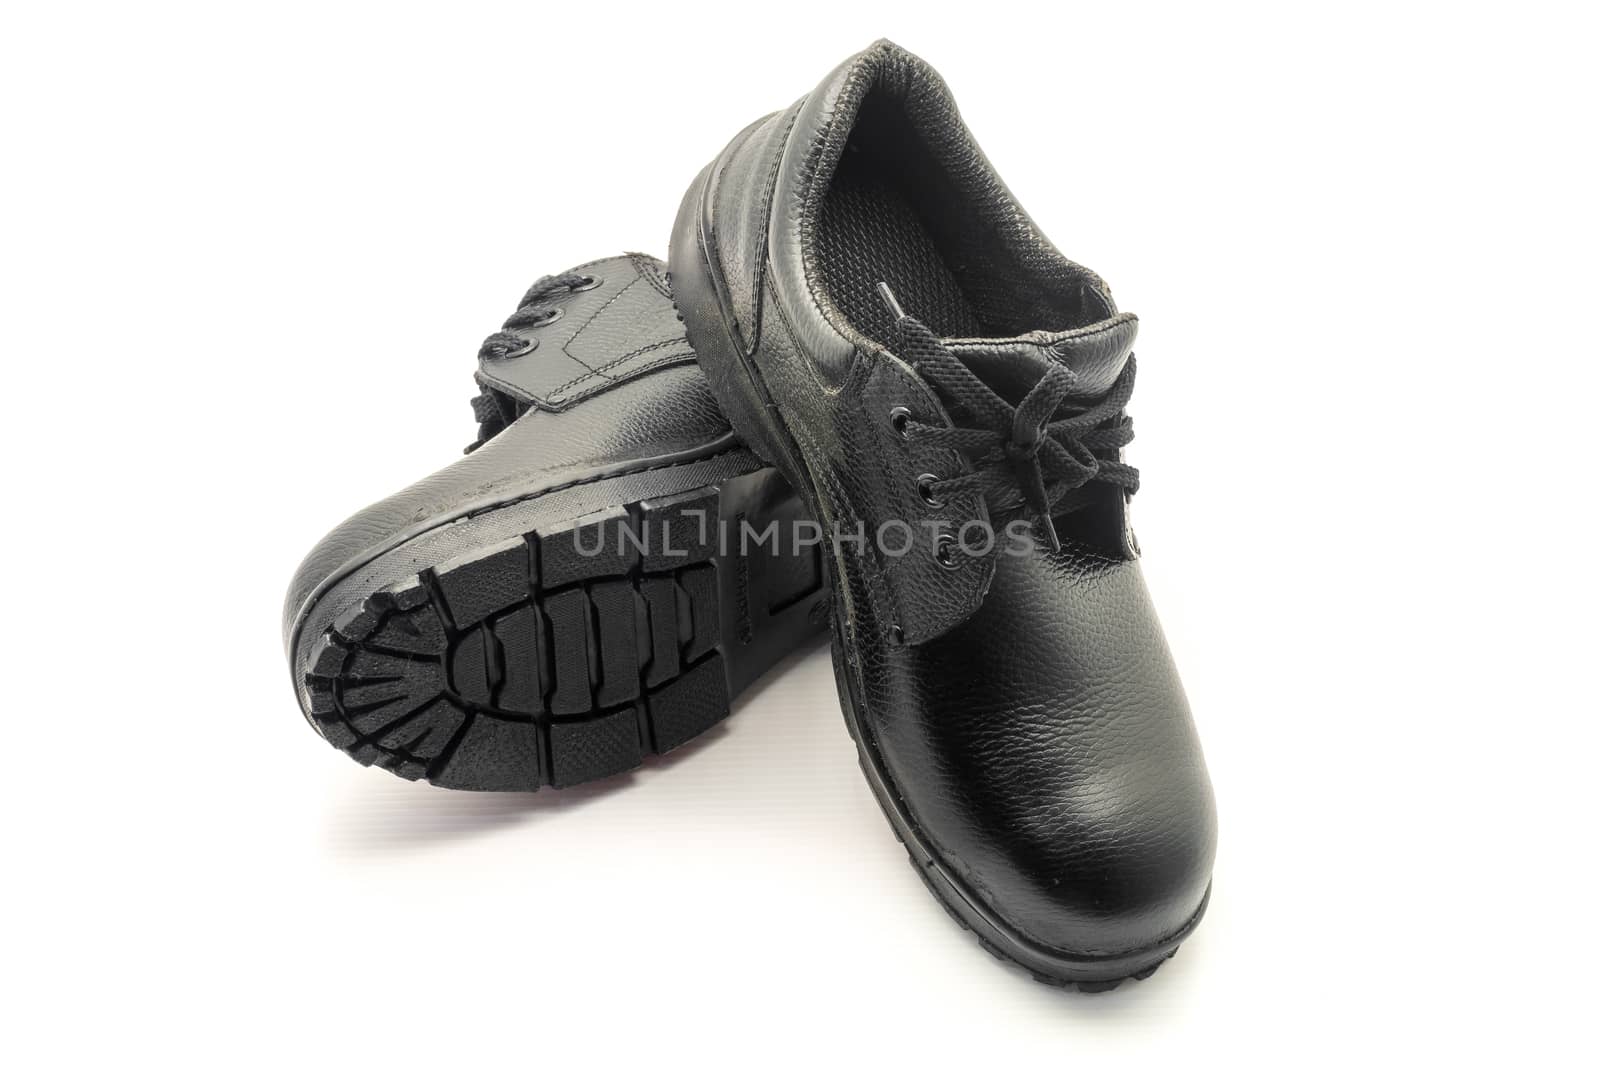 Protective workwear black safety shoes on white background.